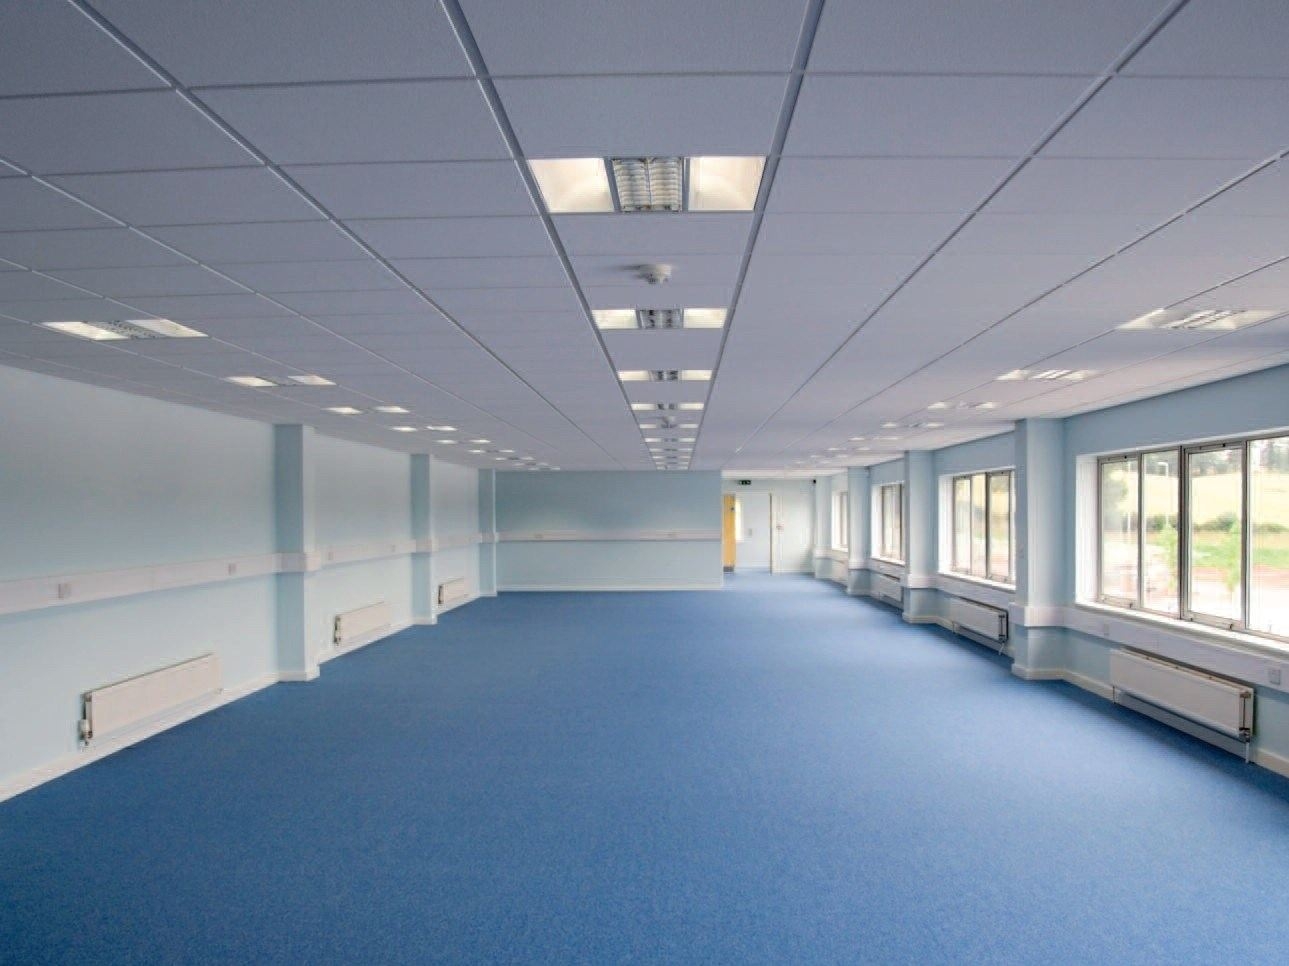 Acrylic Suspended Ceiling Tiles Acrylic Suspended Ceiling Tiles mineral fibre ceiling tiles star tone smooth itp 1289 X 966